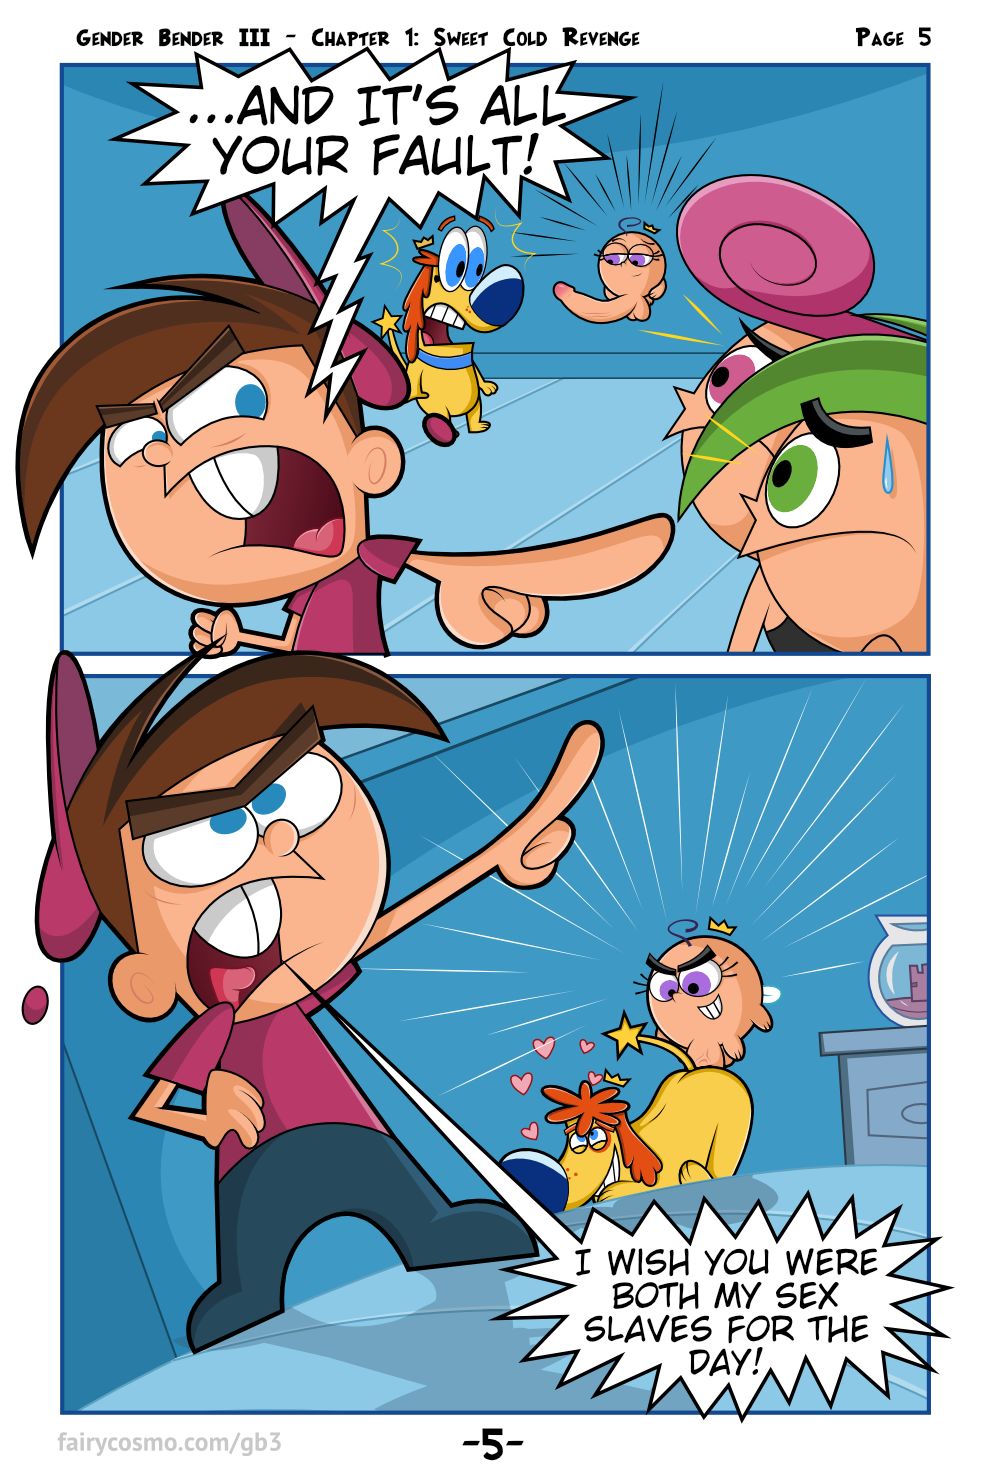 Fairly OddParents - Gender Bender III (Fairycosmo) page 6